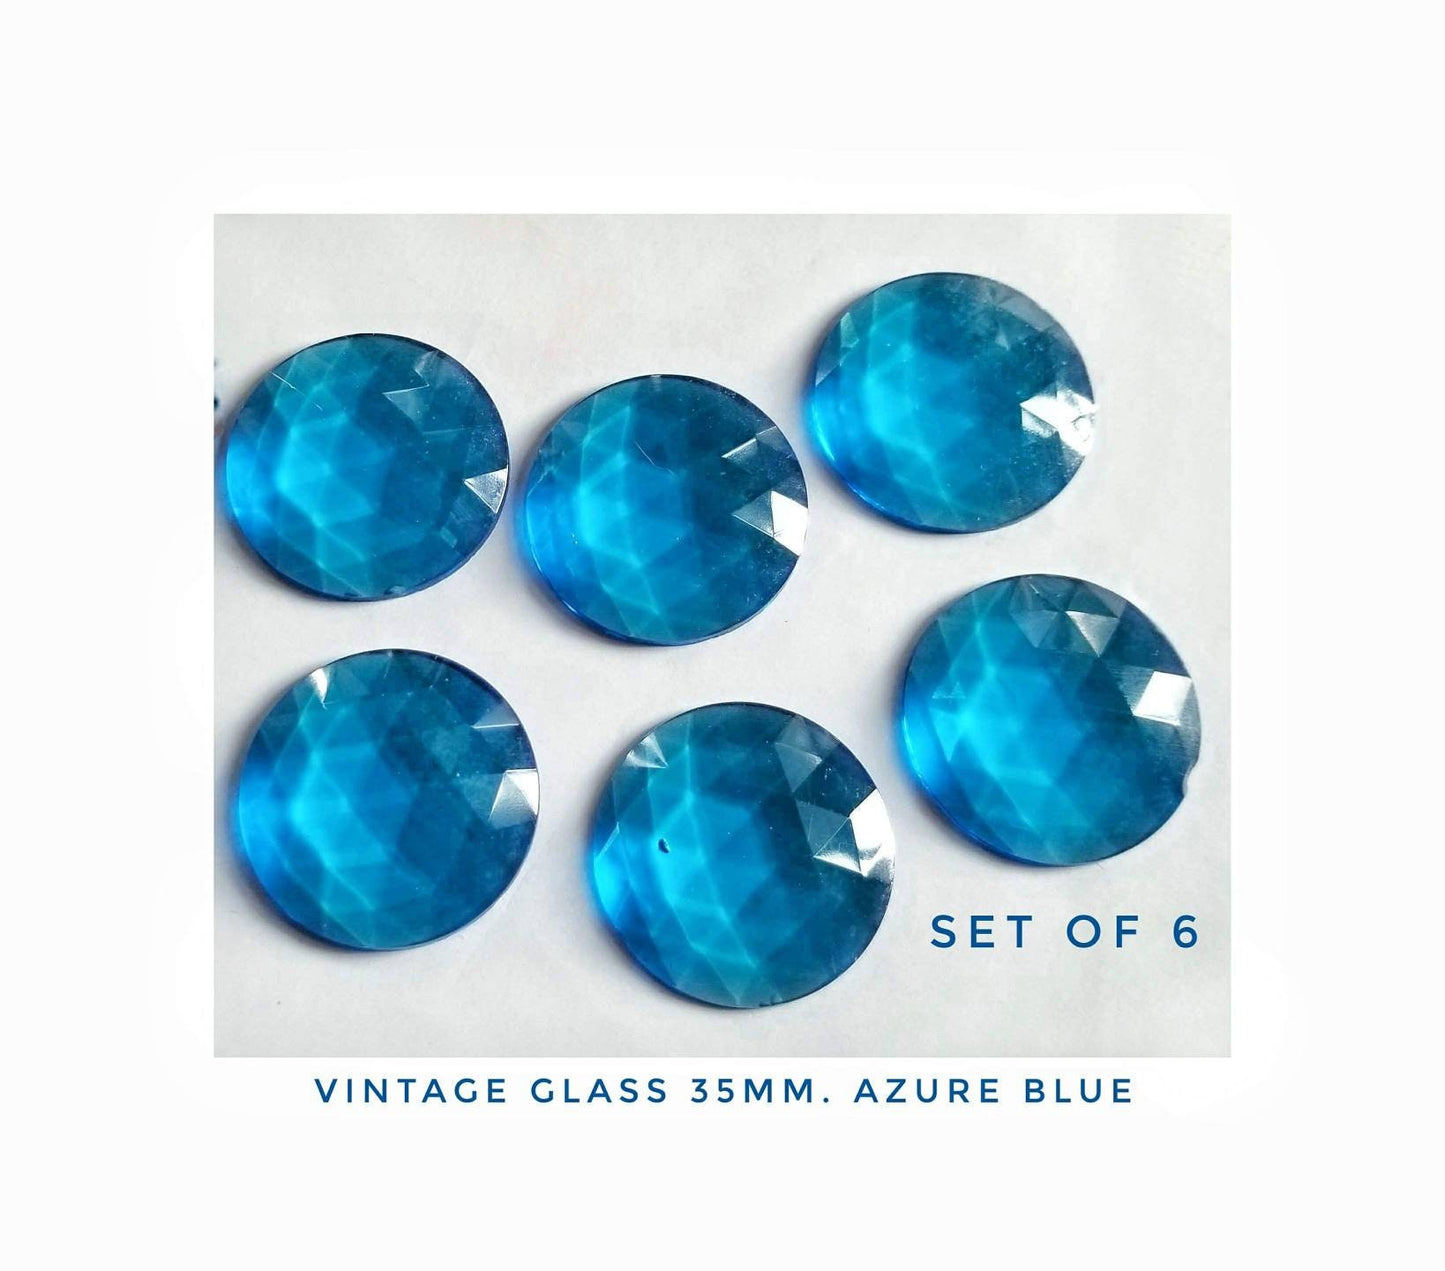 Stained Glass Jewels. Vintage Faceted Gems for Copper Foil or Came, Craft Projects. Soutache Jewelry pendants. Very pretty Azure Blue. 35mm.